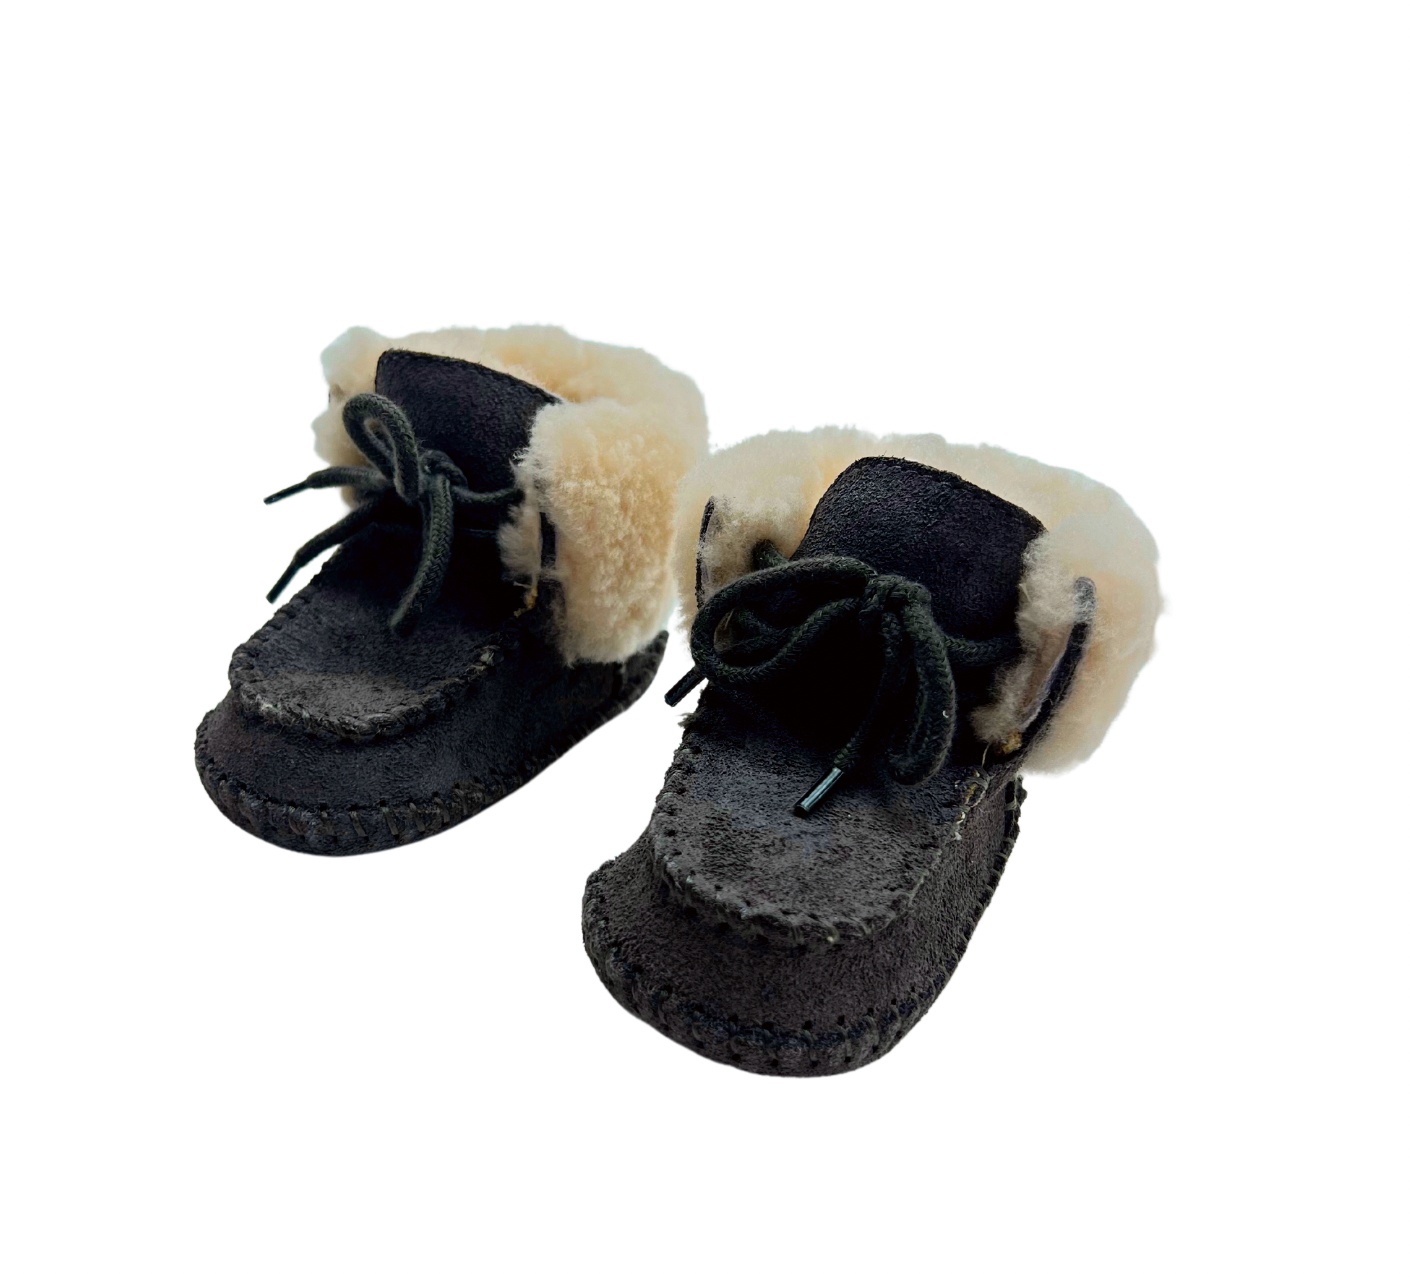 UGG - Gray lined slippers - 0/6 months